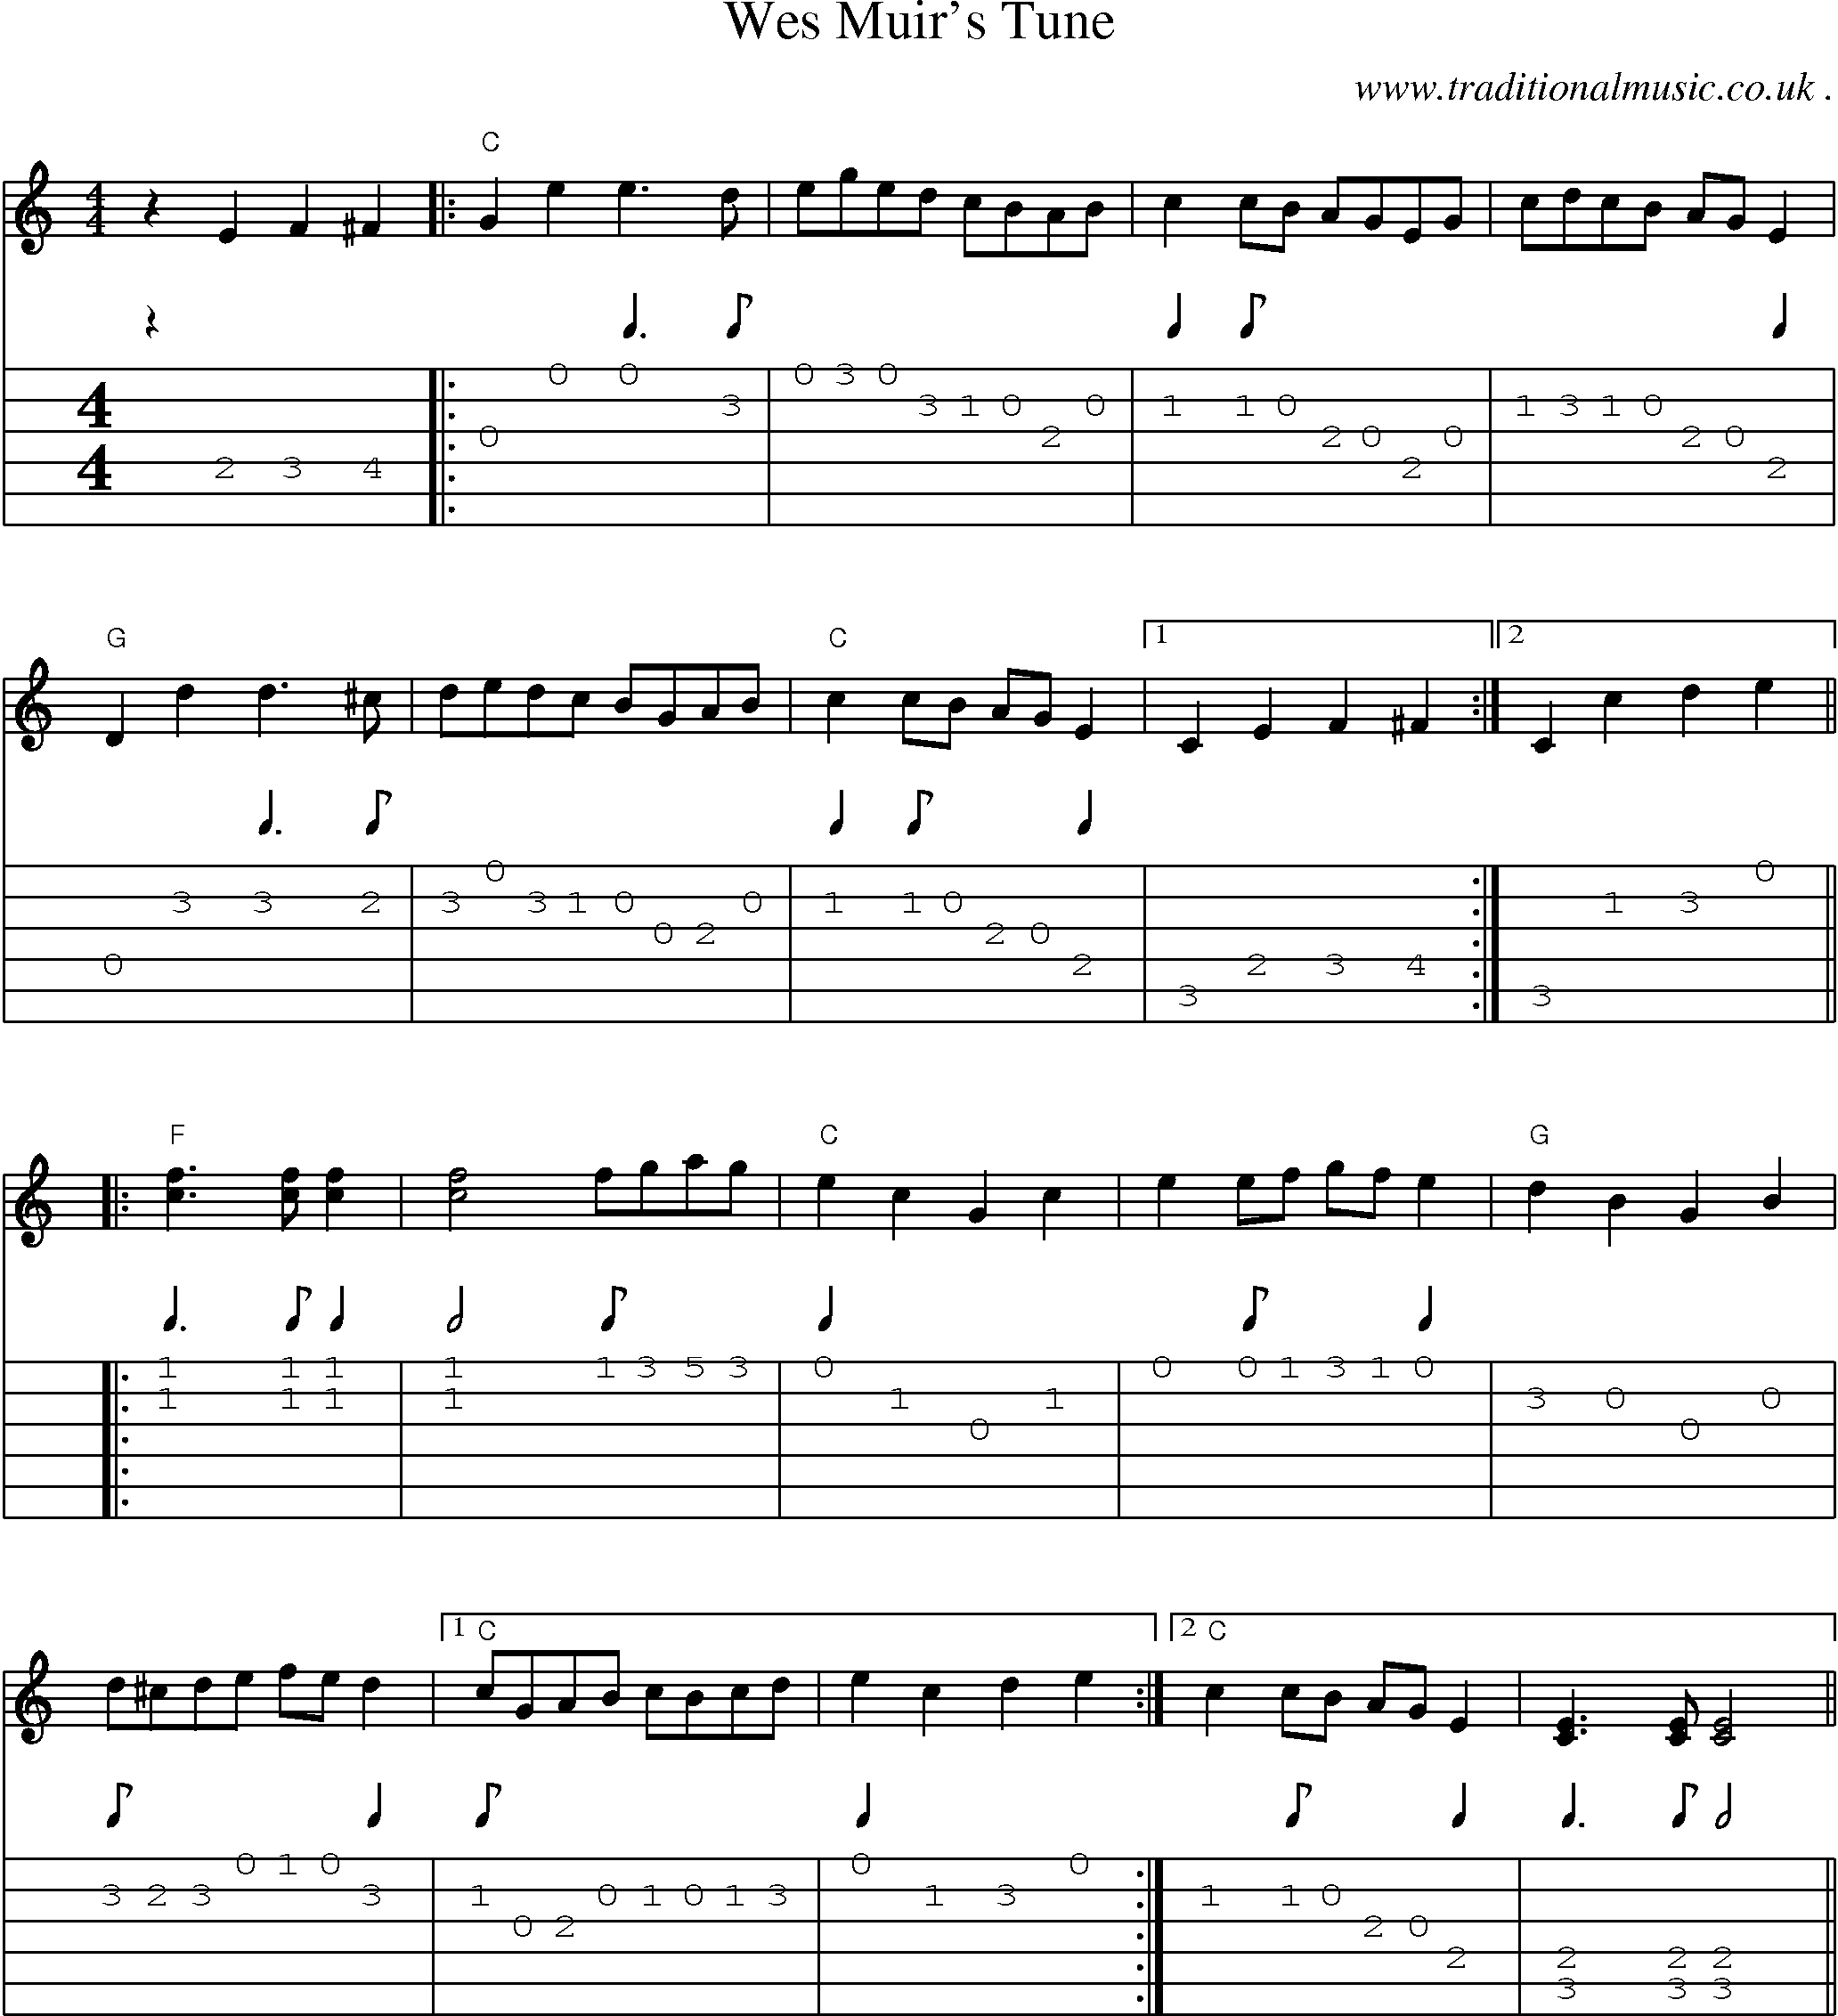 Music Score and Guitar Tabs for Wes Muirs Tune